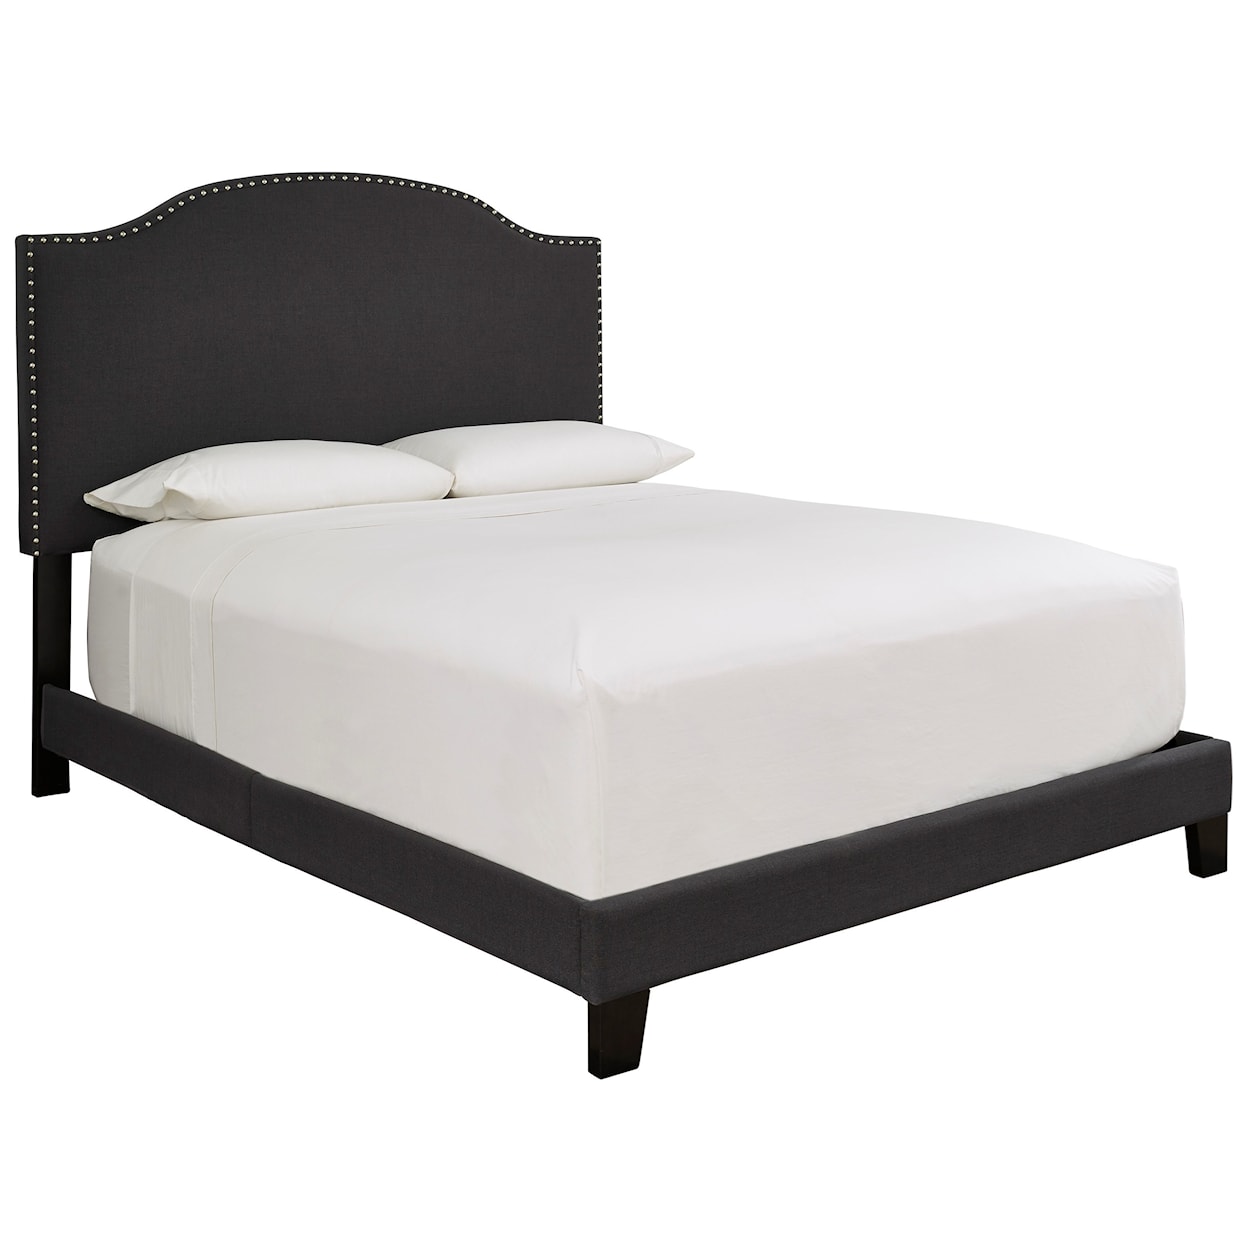 Signature Design by Ashley Adelloni Queen Upholstered Bed